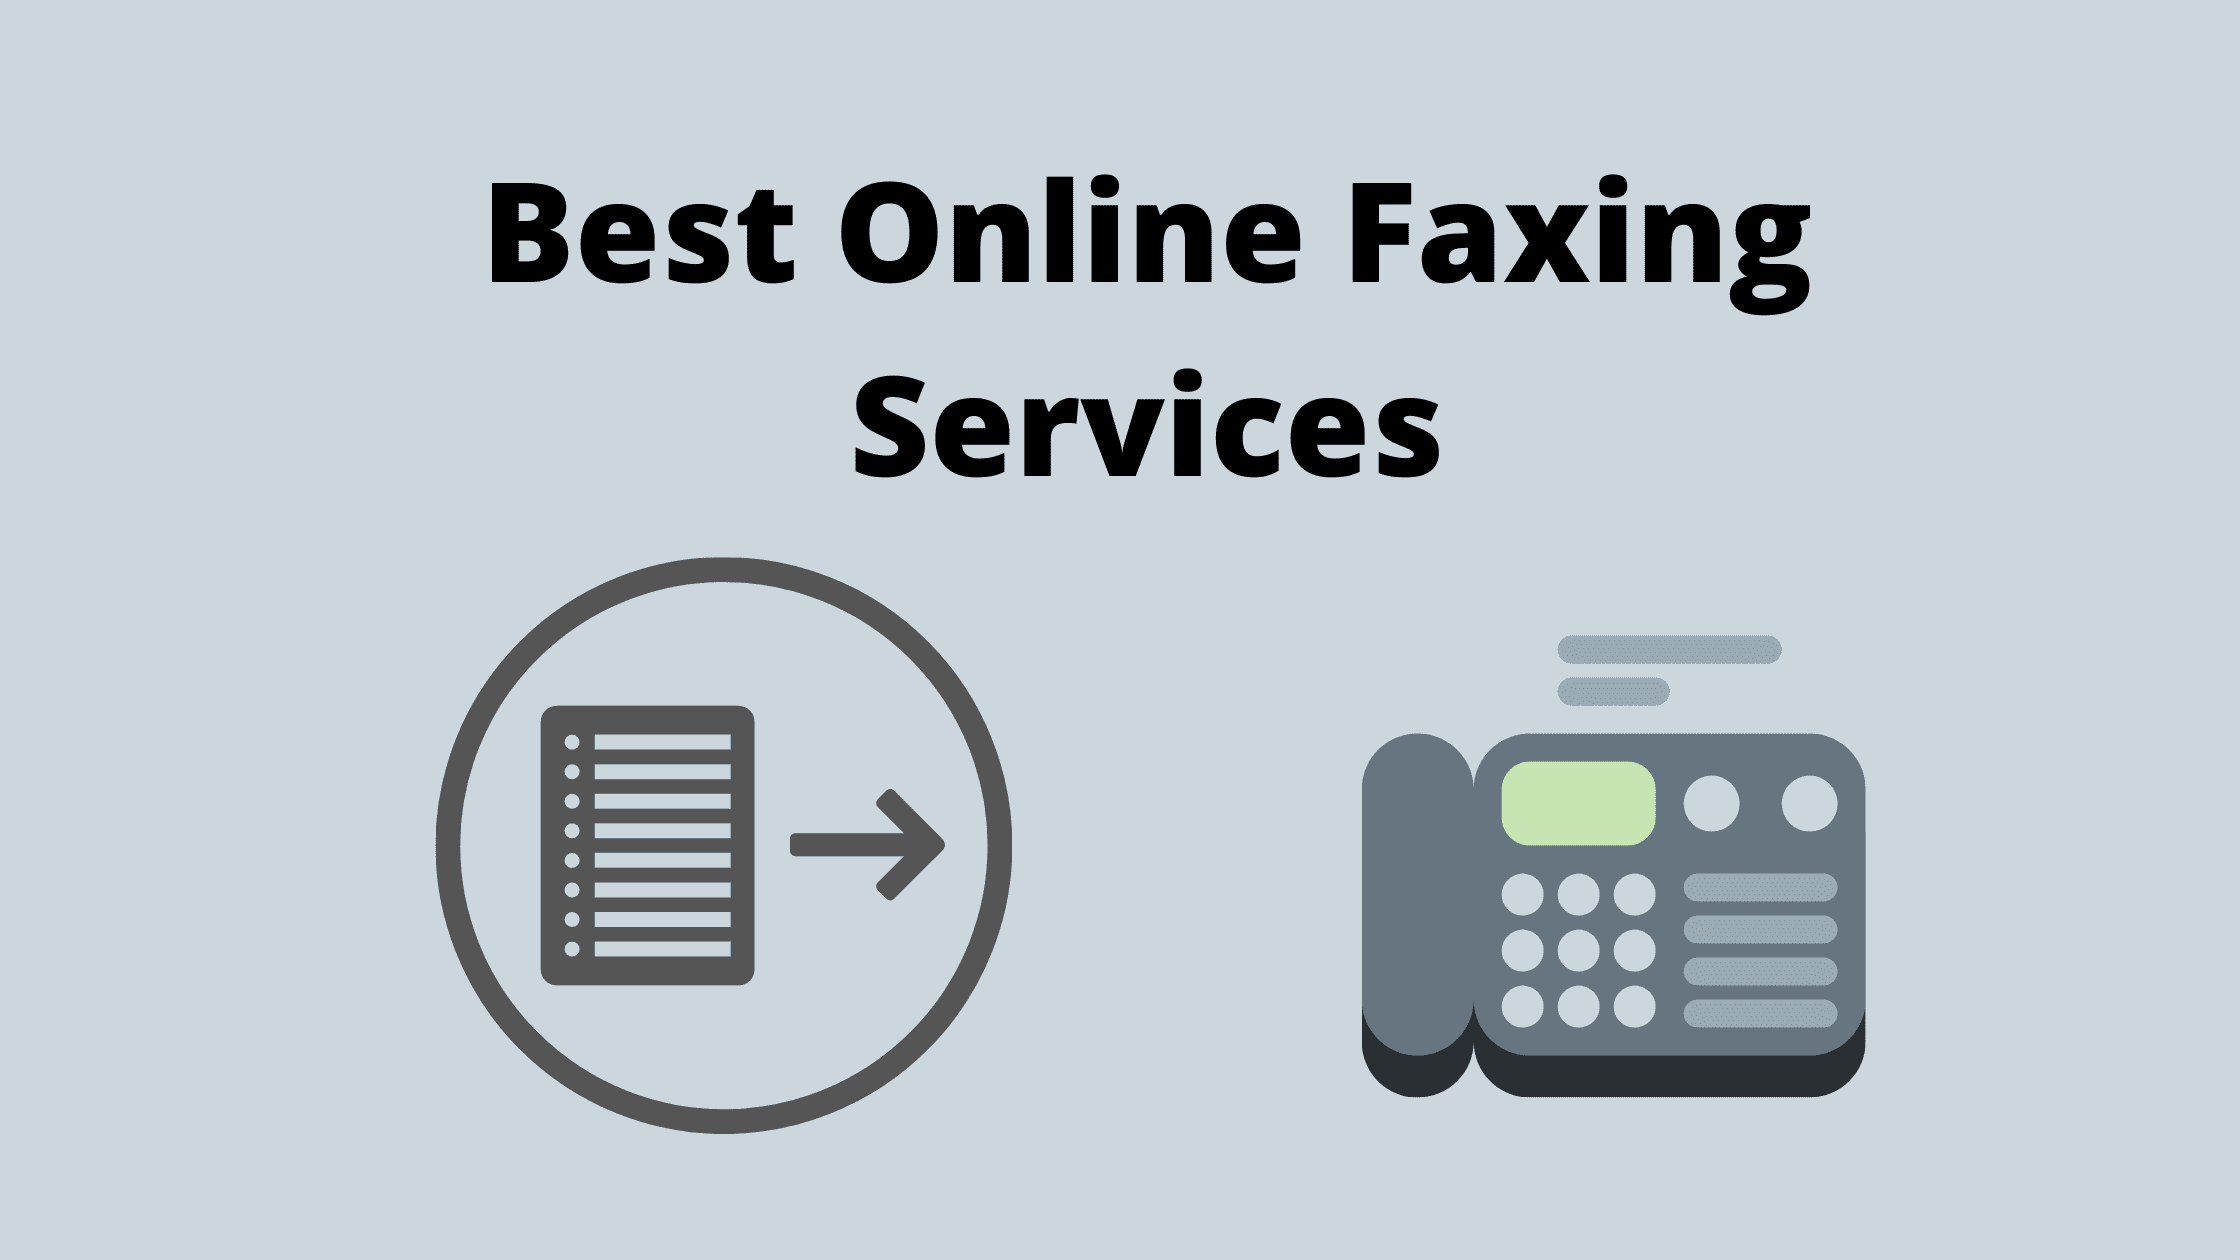 Best Online Faxing Services